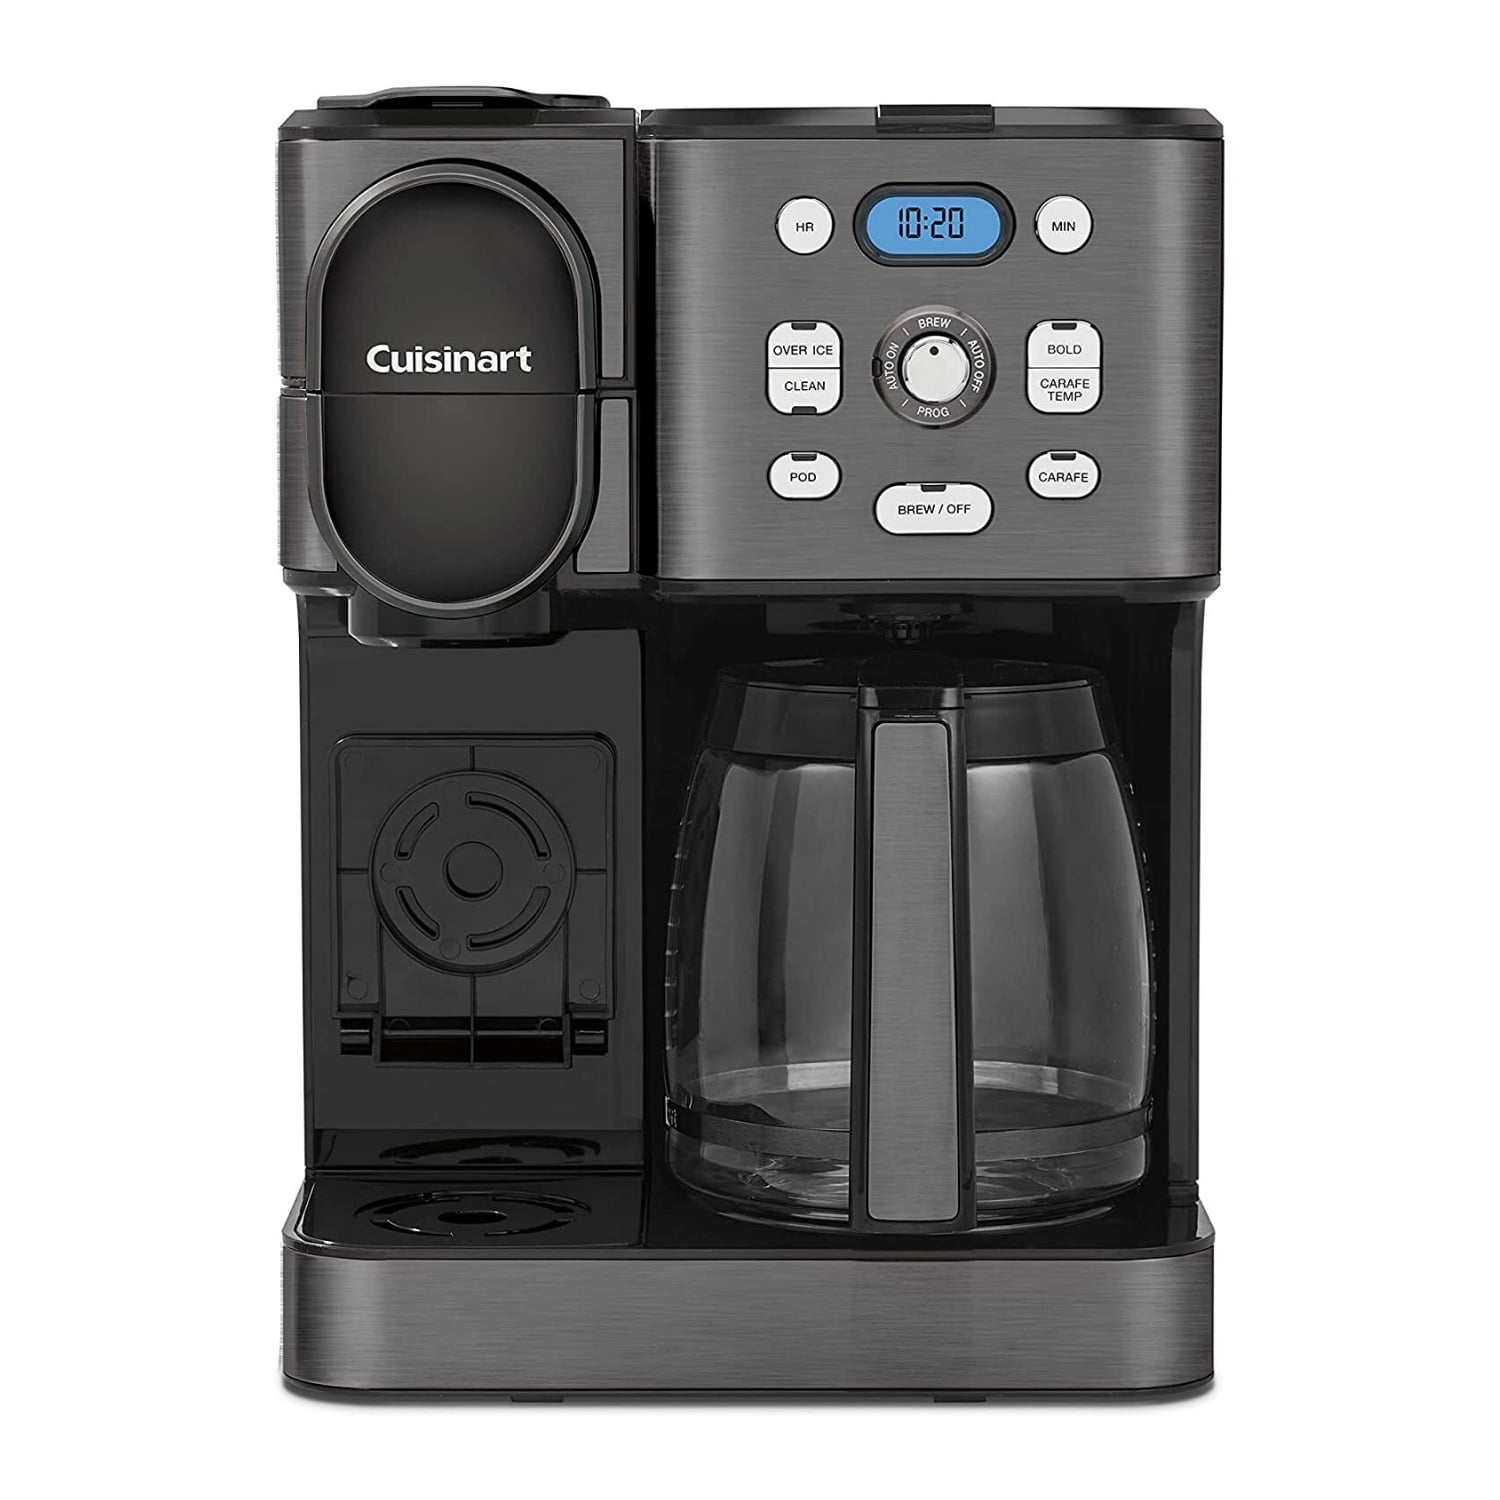 Cuisinart BRU 2-Cup Coffeemaker - Black with Stainless Steel - Lodging Kit  Company